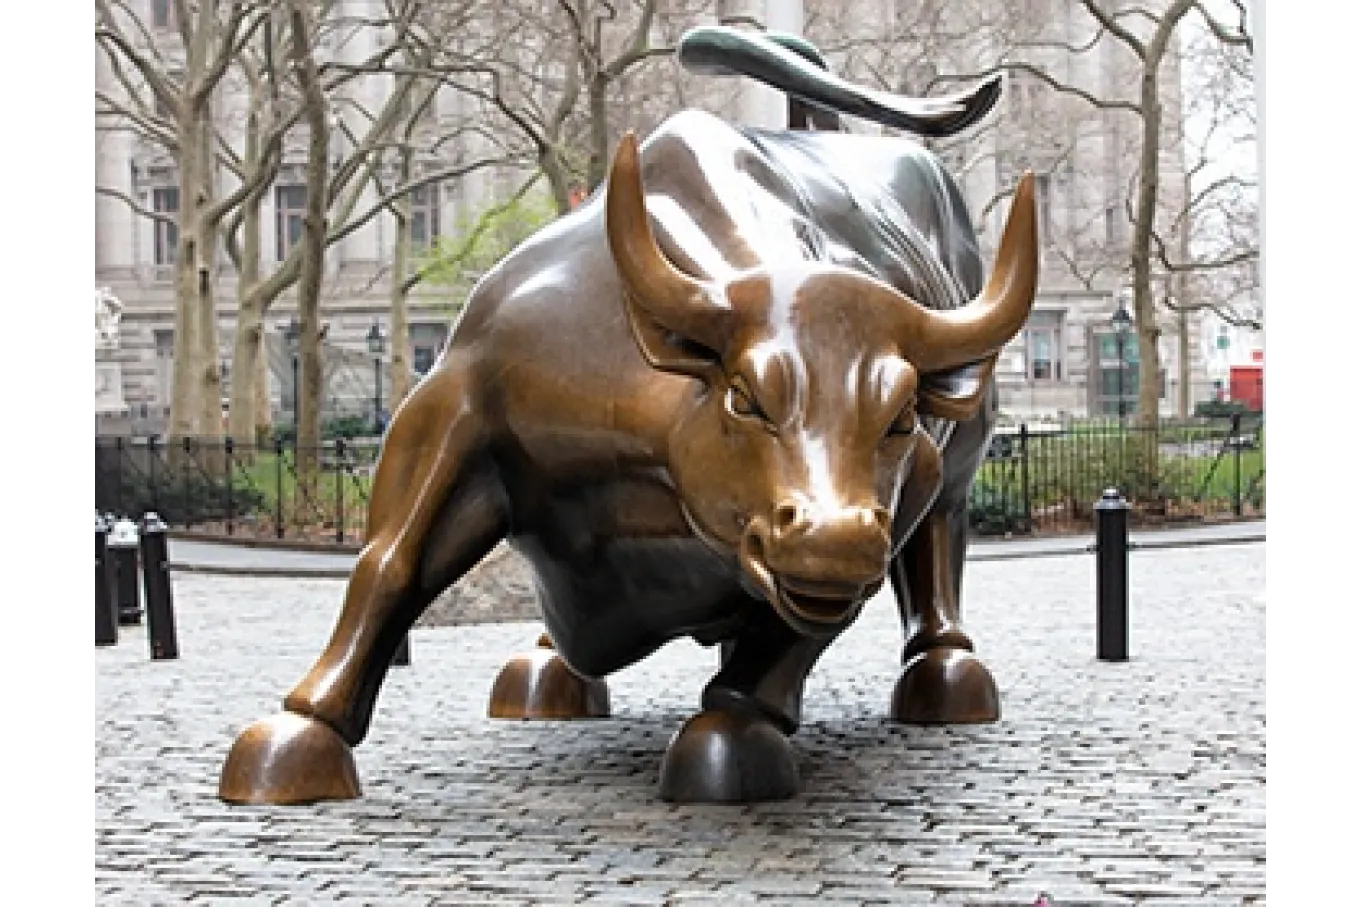 Statue of the Wall Street bull